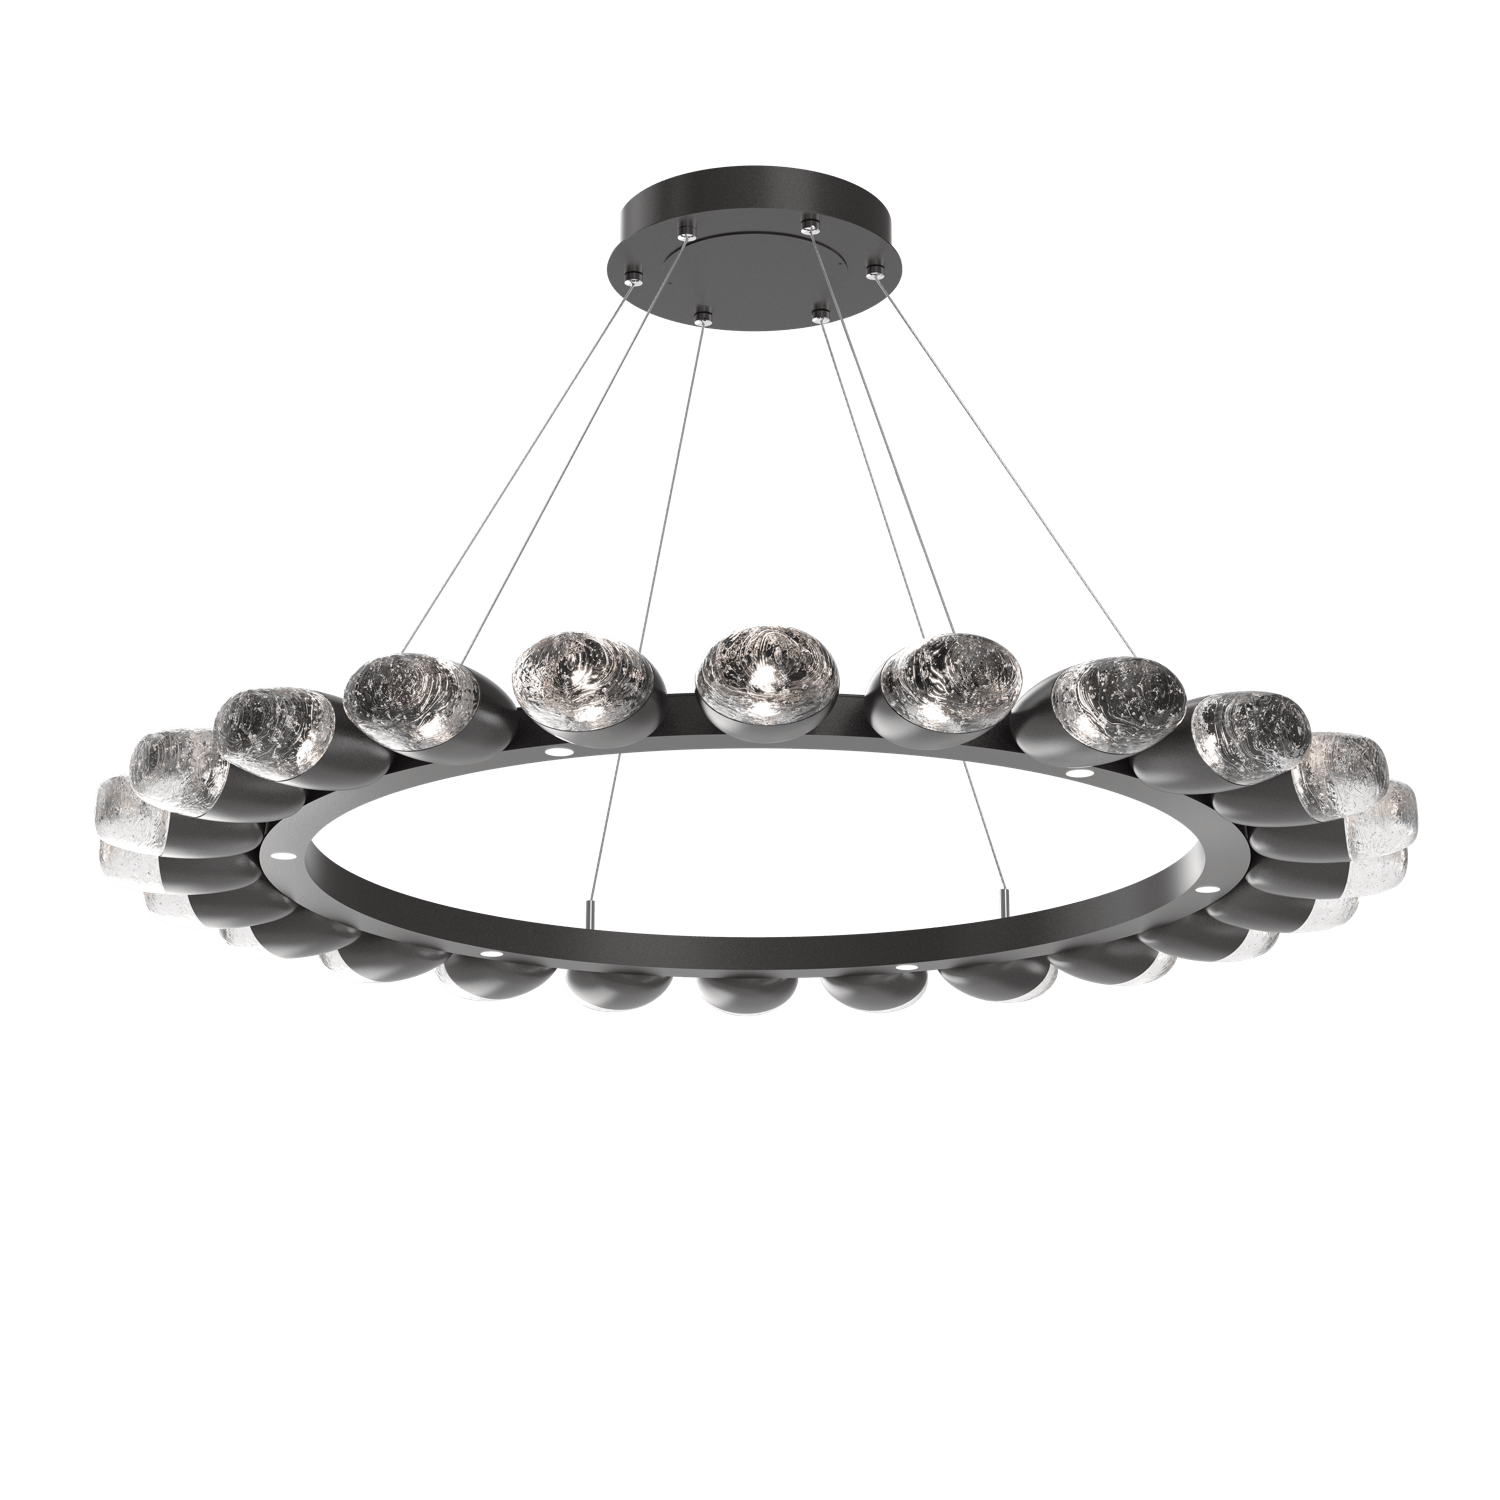 CHB0079-48-GP-Hammerton-Studio-Pebble-48-inch-radial-ring-chandelier-with-graphite-finish-and-clear-cast-glass-shades-and-LED-lamping